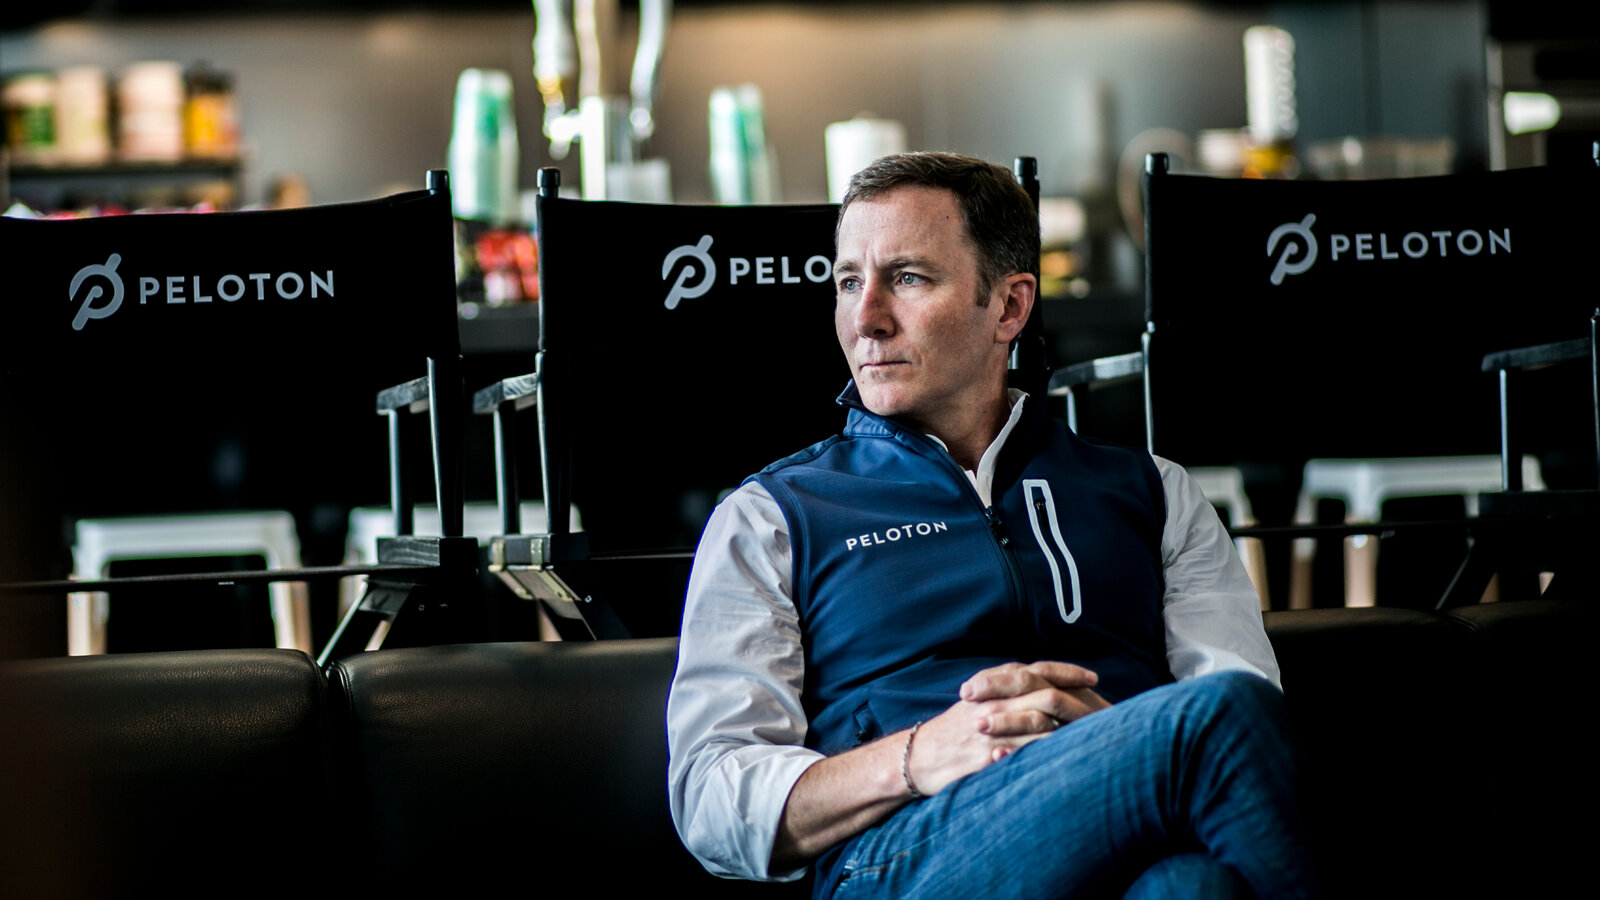 Peloton Announces Significant Layoffs and Leadership Shake-Up Amidst Restructuring Efforts